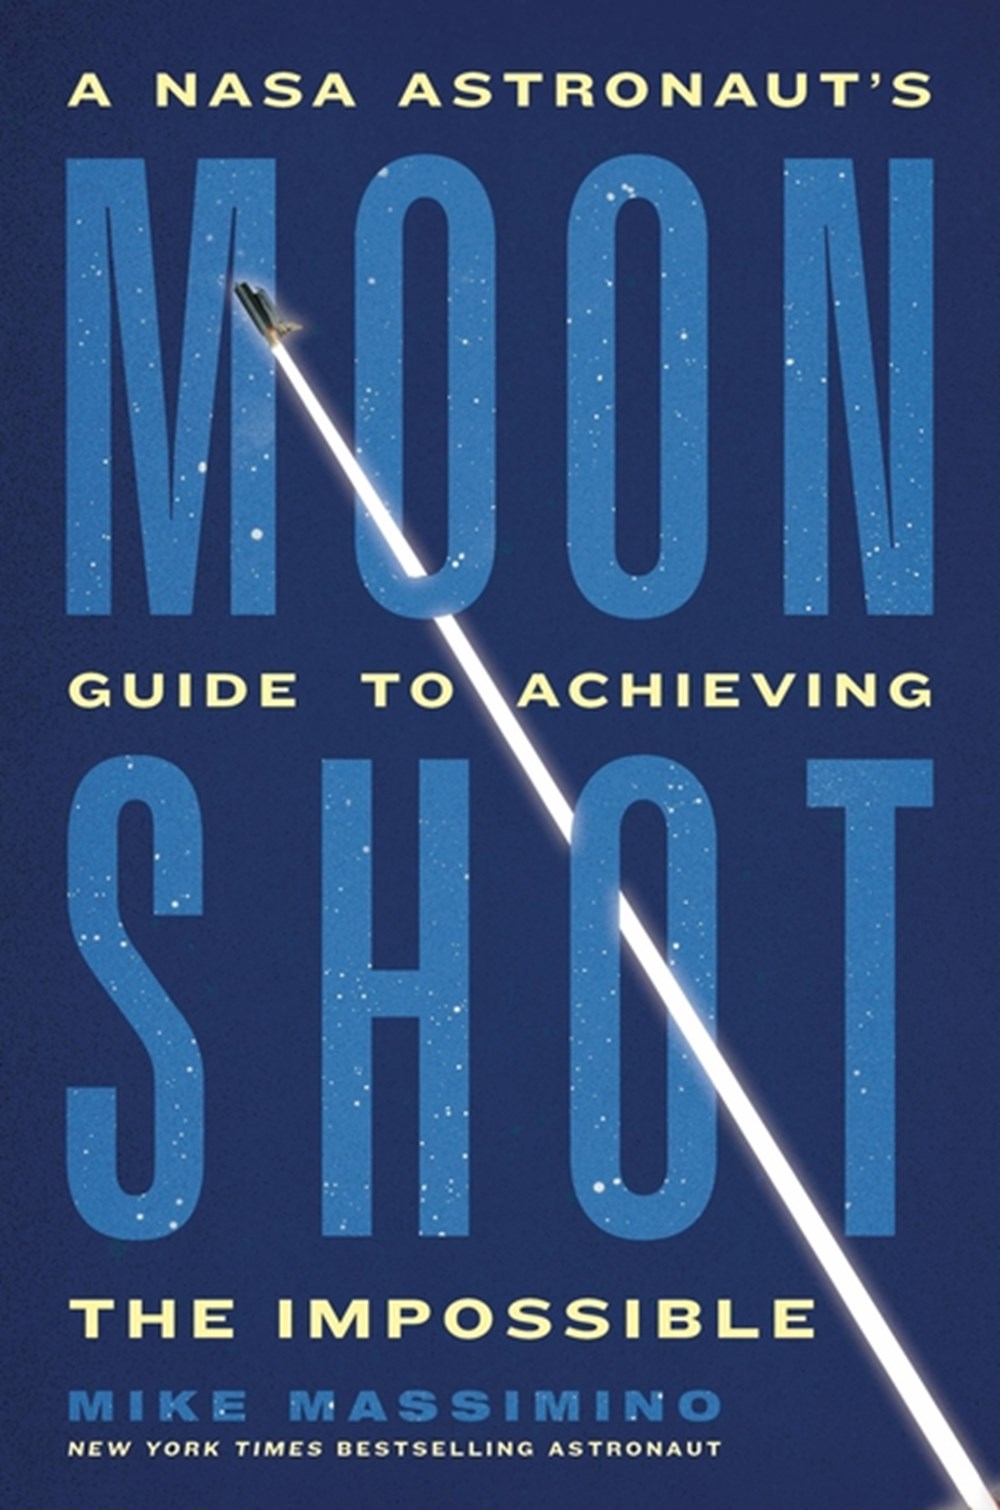 Moonshot A NASA Astronaut's Guide to Achieving the Impossible